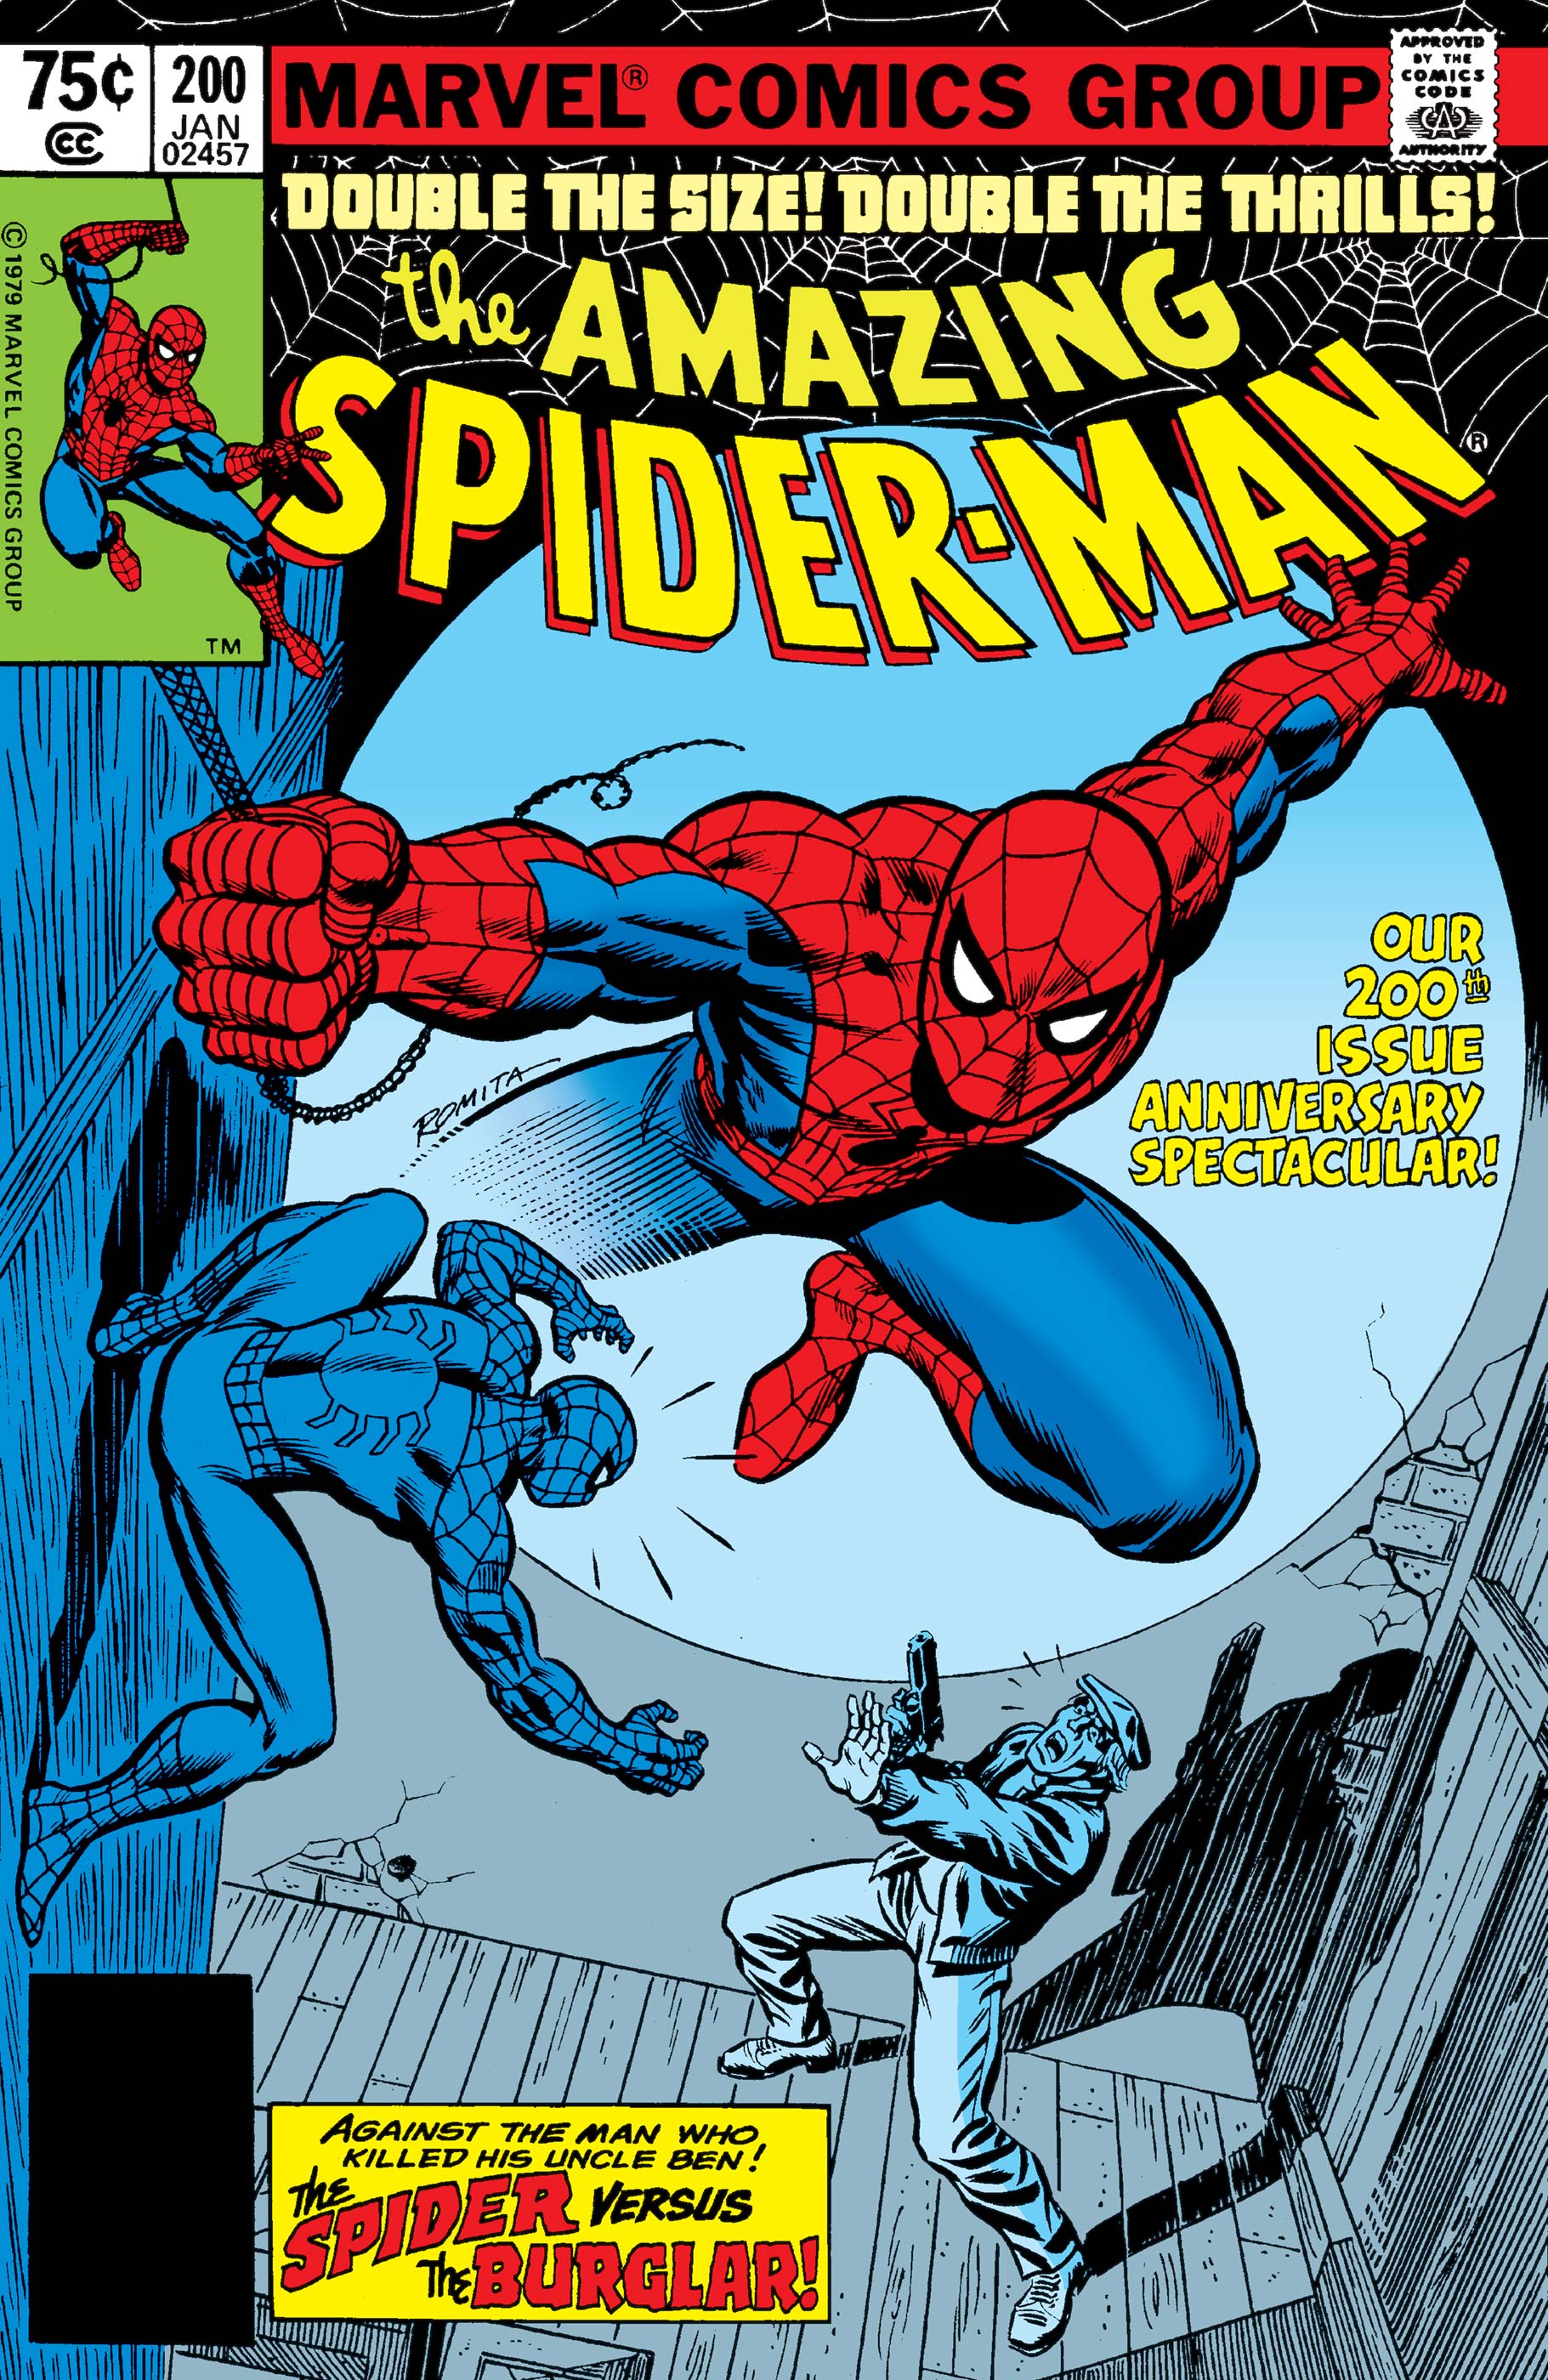 The Amazing Spider-Man (1963) #200 | Comic Issues | Marvel